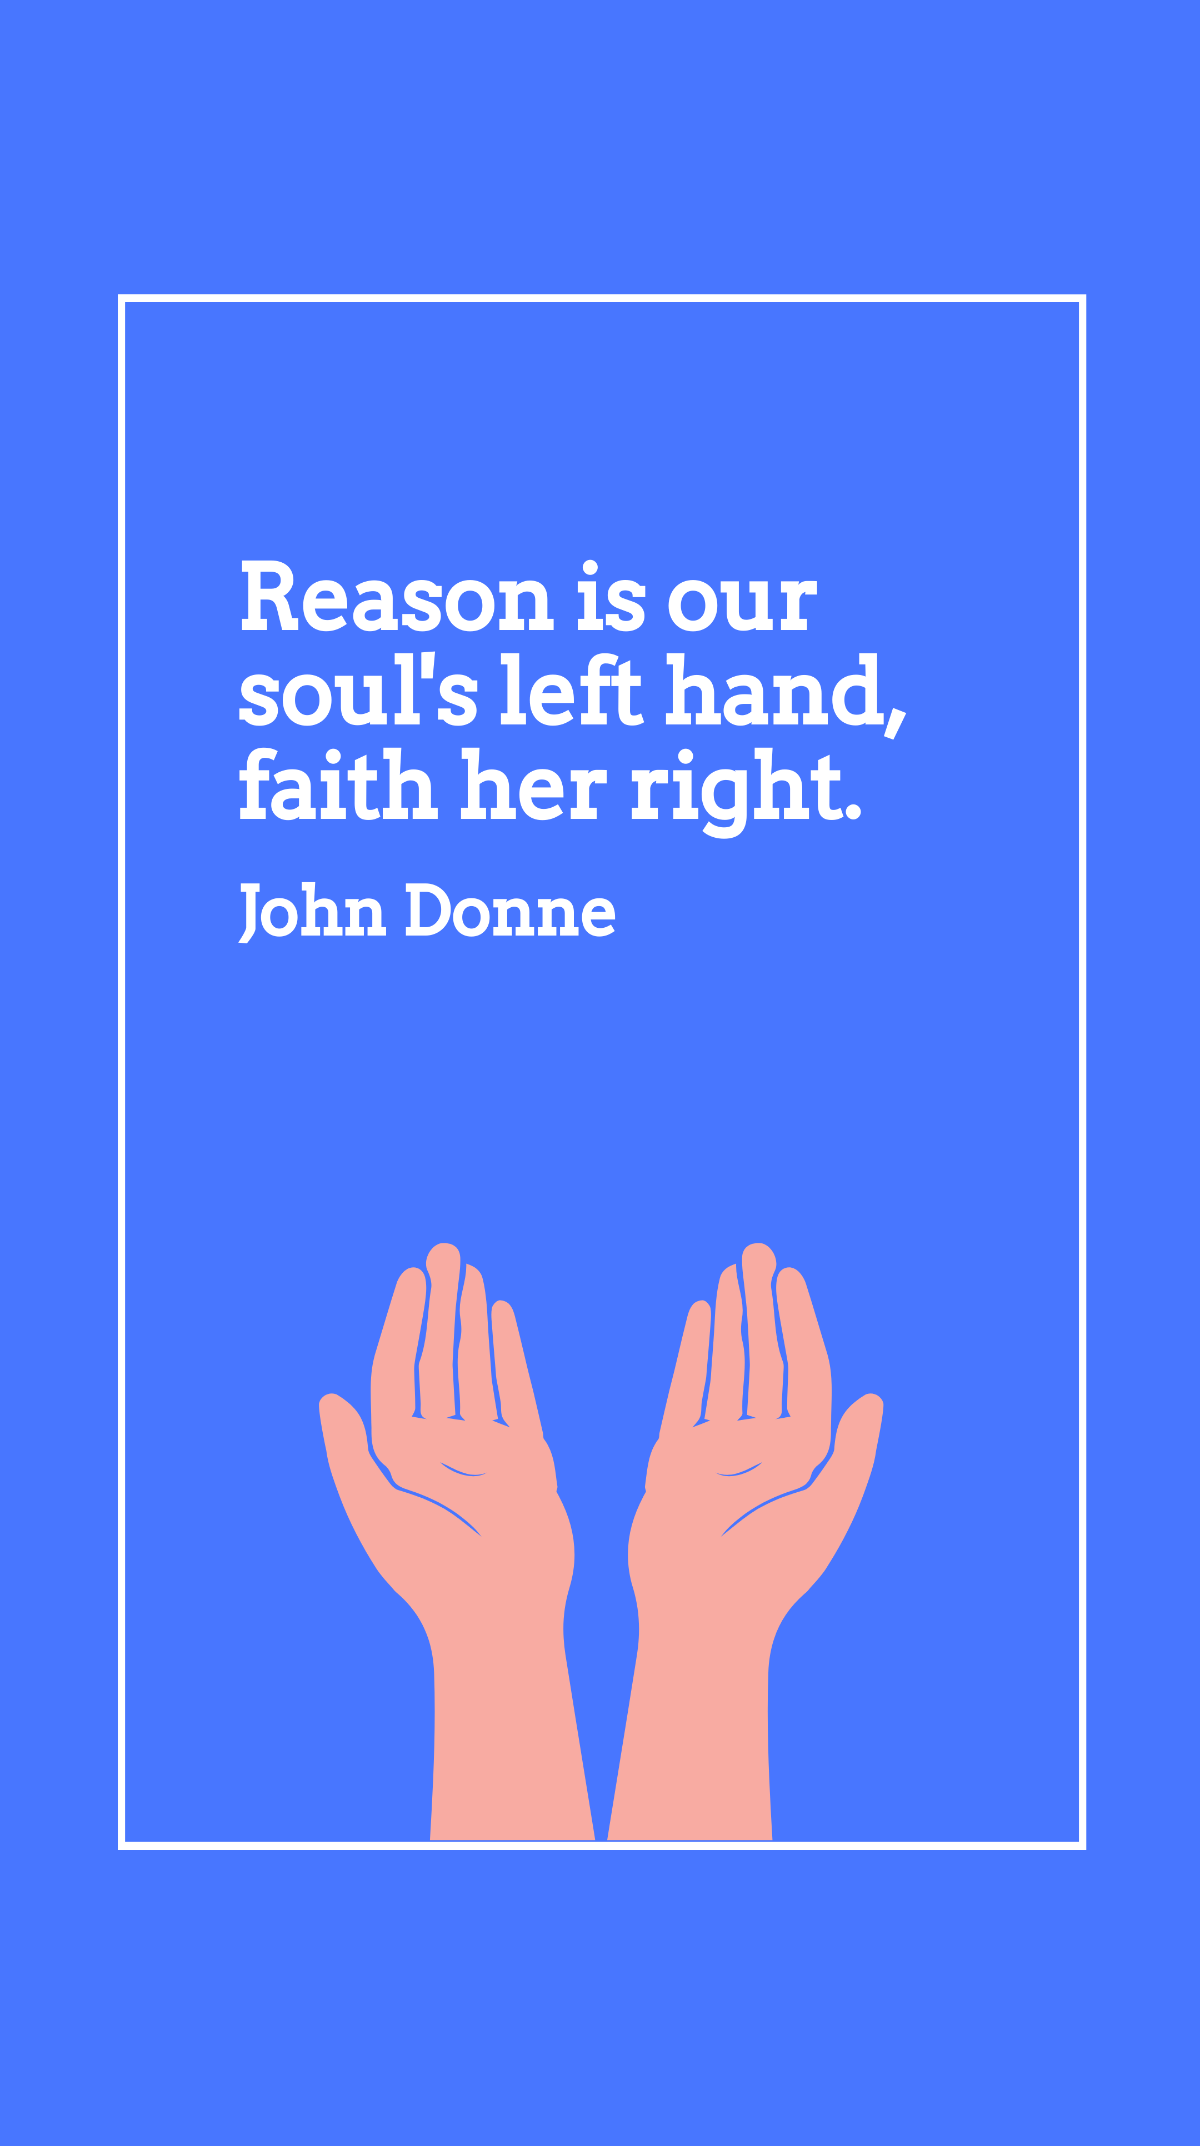 John Donne - Reason is our soul's left hand, faith her right.